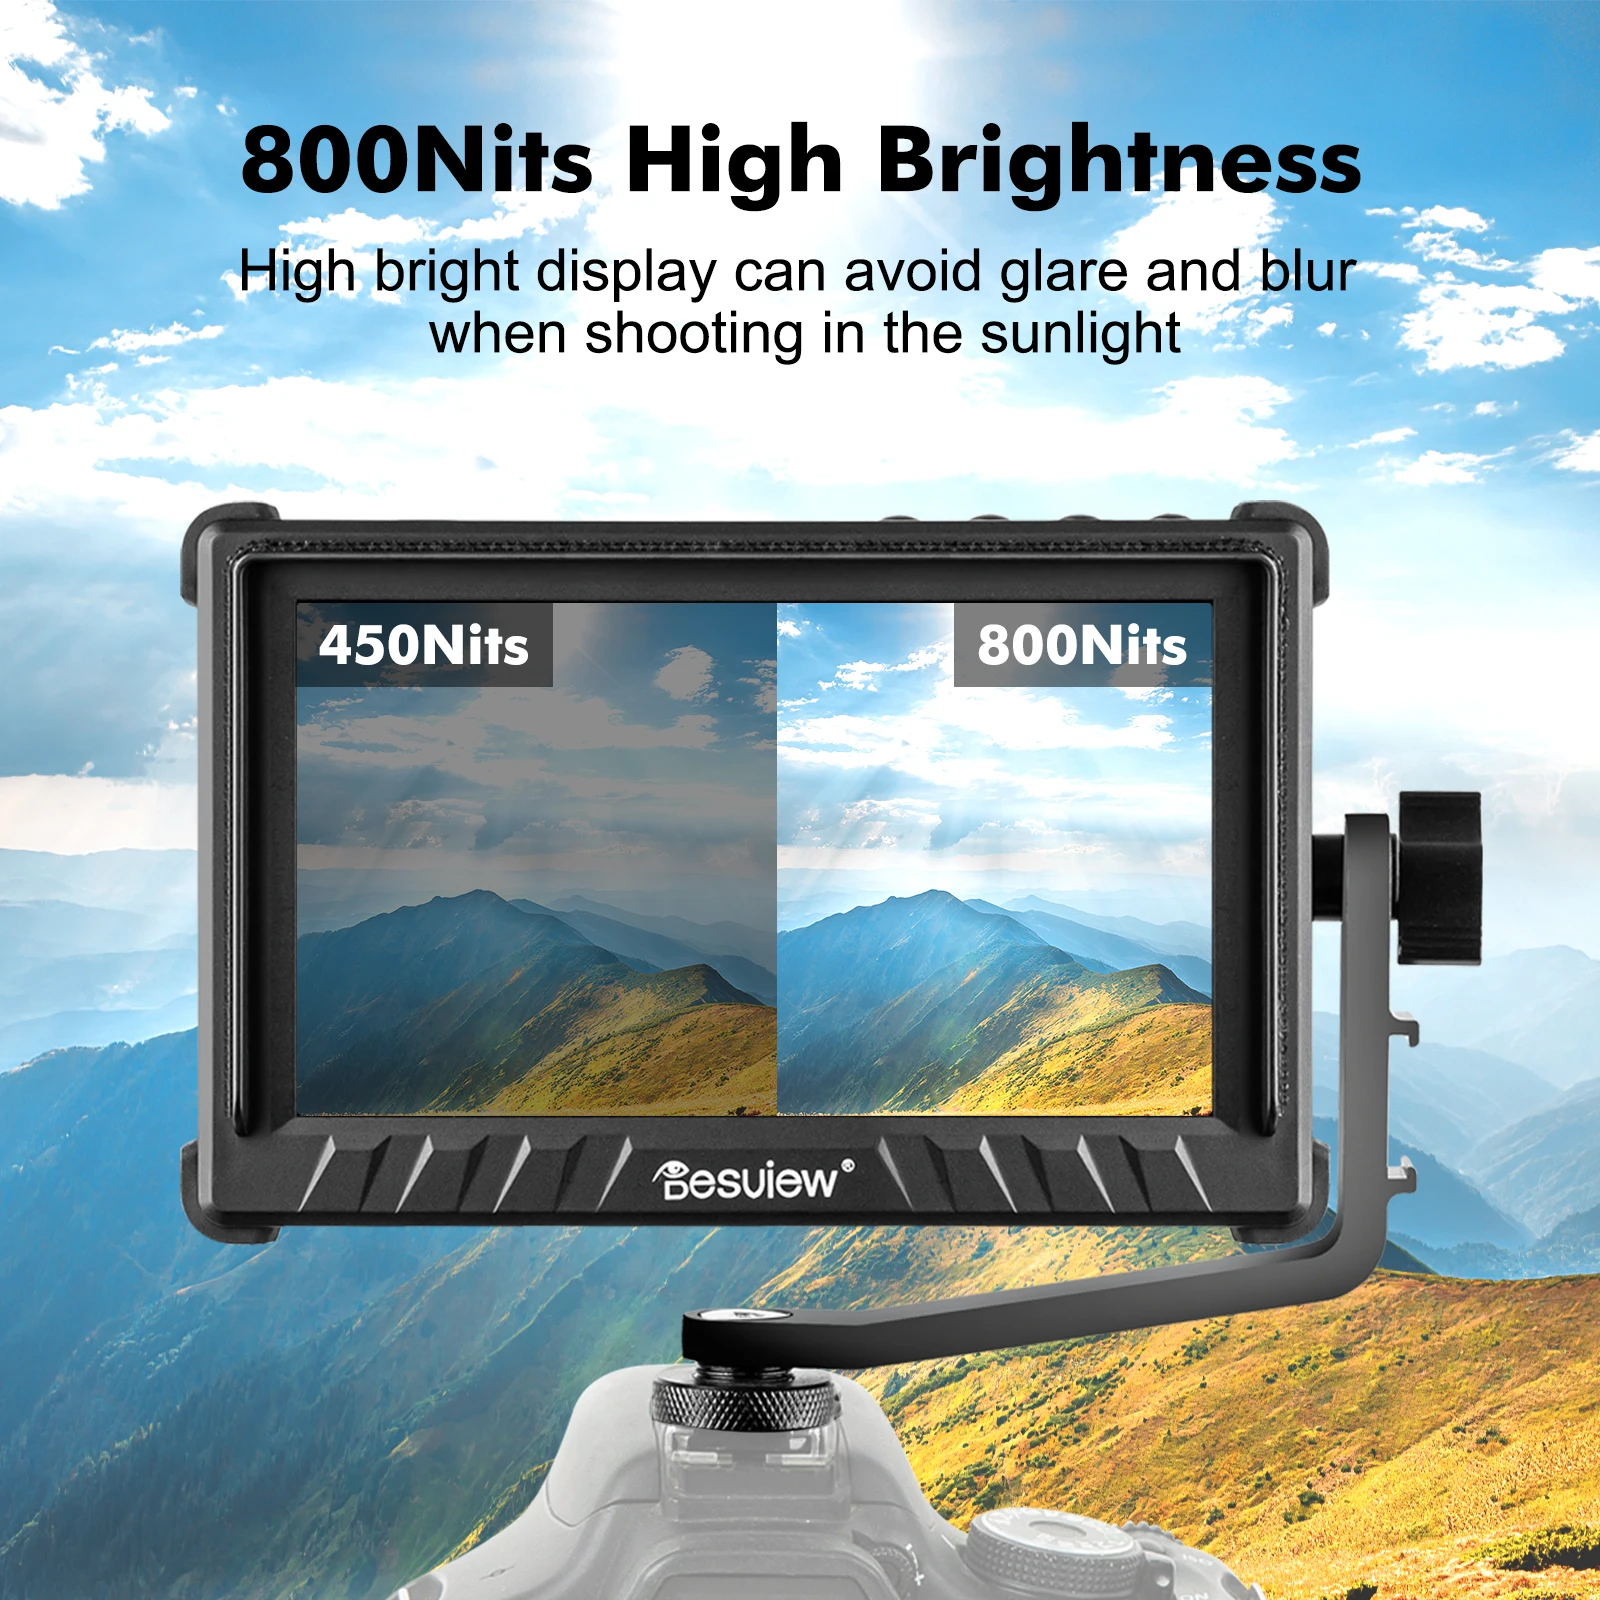 Desview Camera Monitor 800nits High Brightness IPS 178° View Angle 4K HDMI Field Monitor with 3D LUT Include Sunshade & Battery